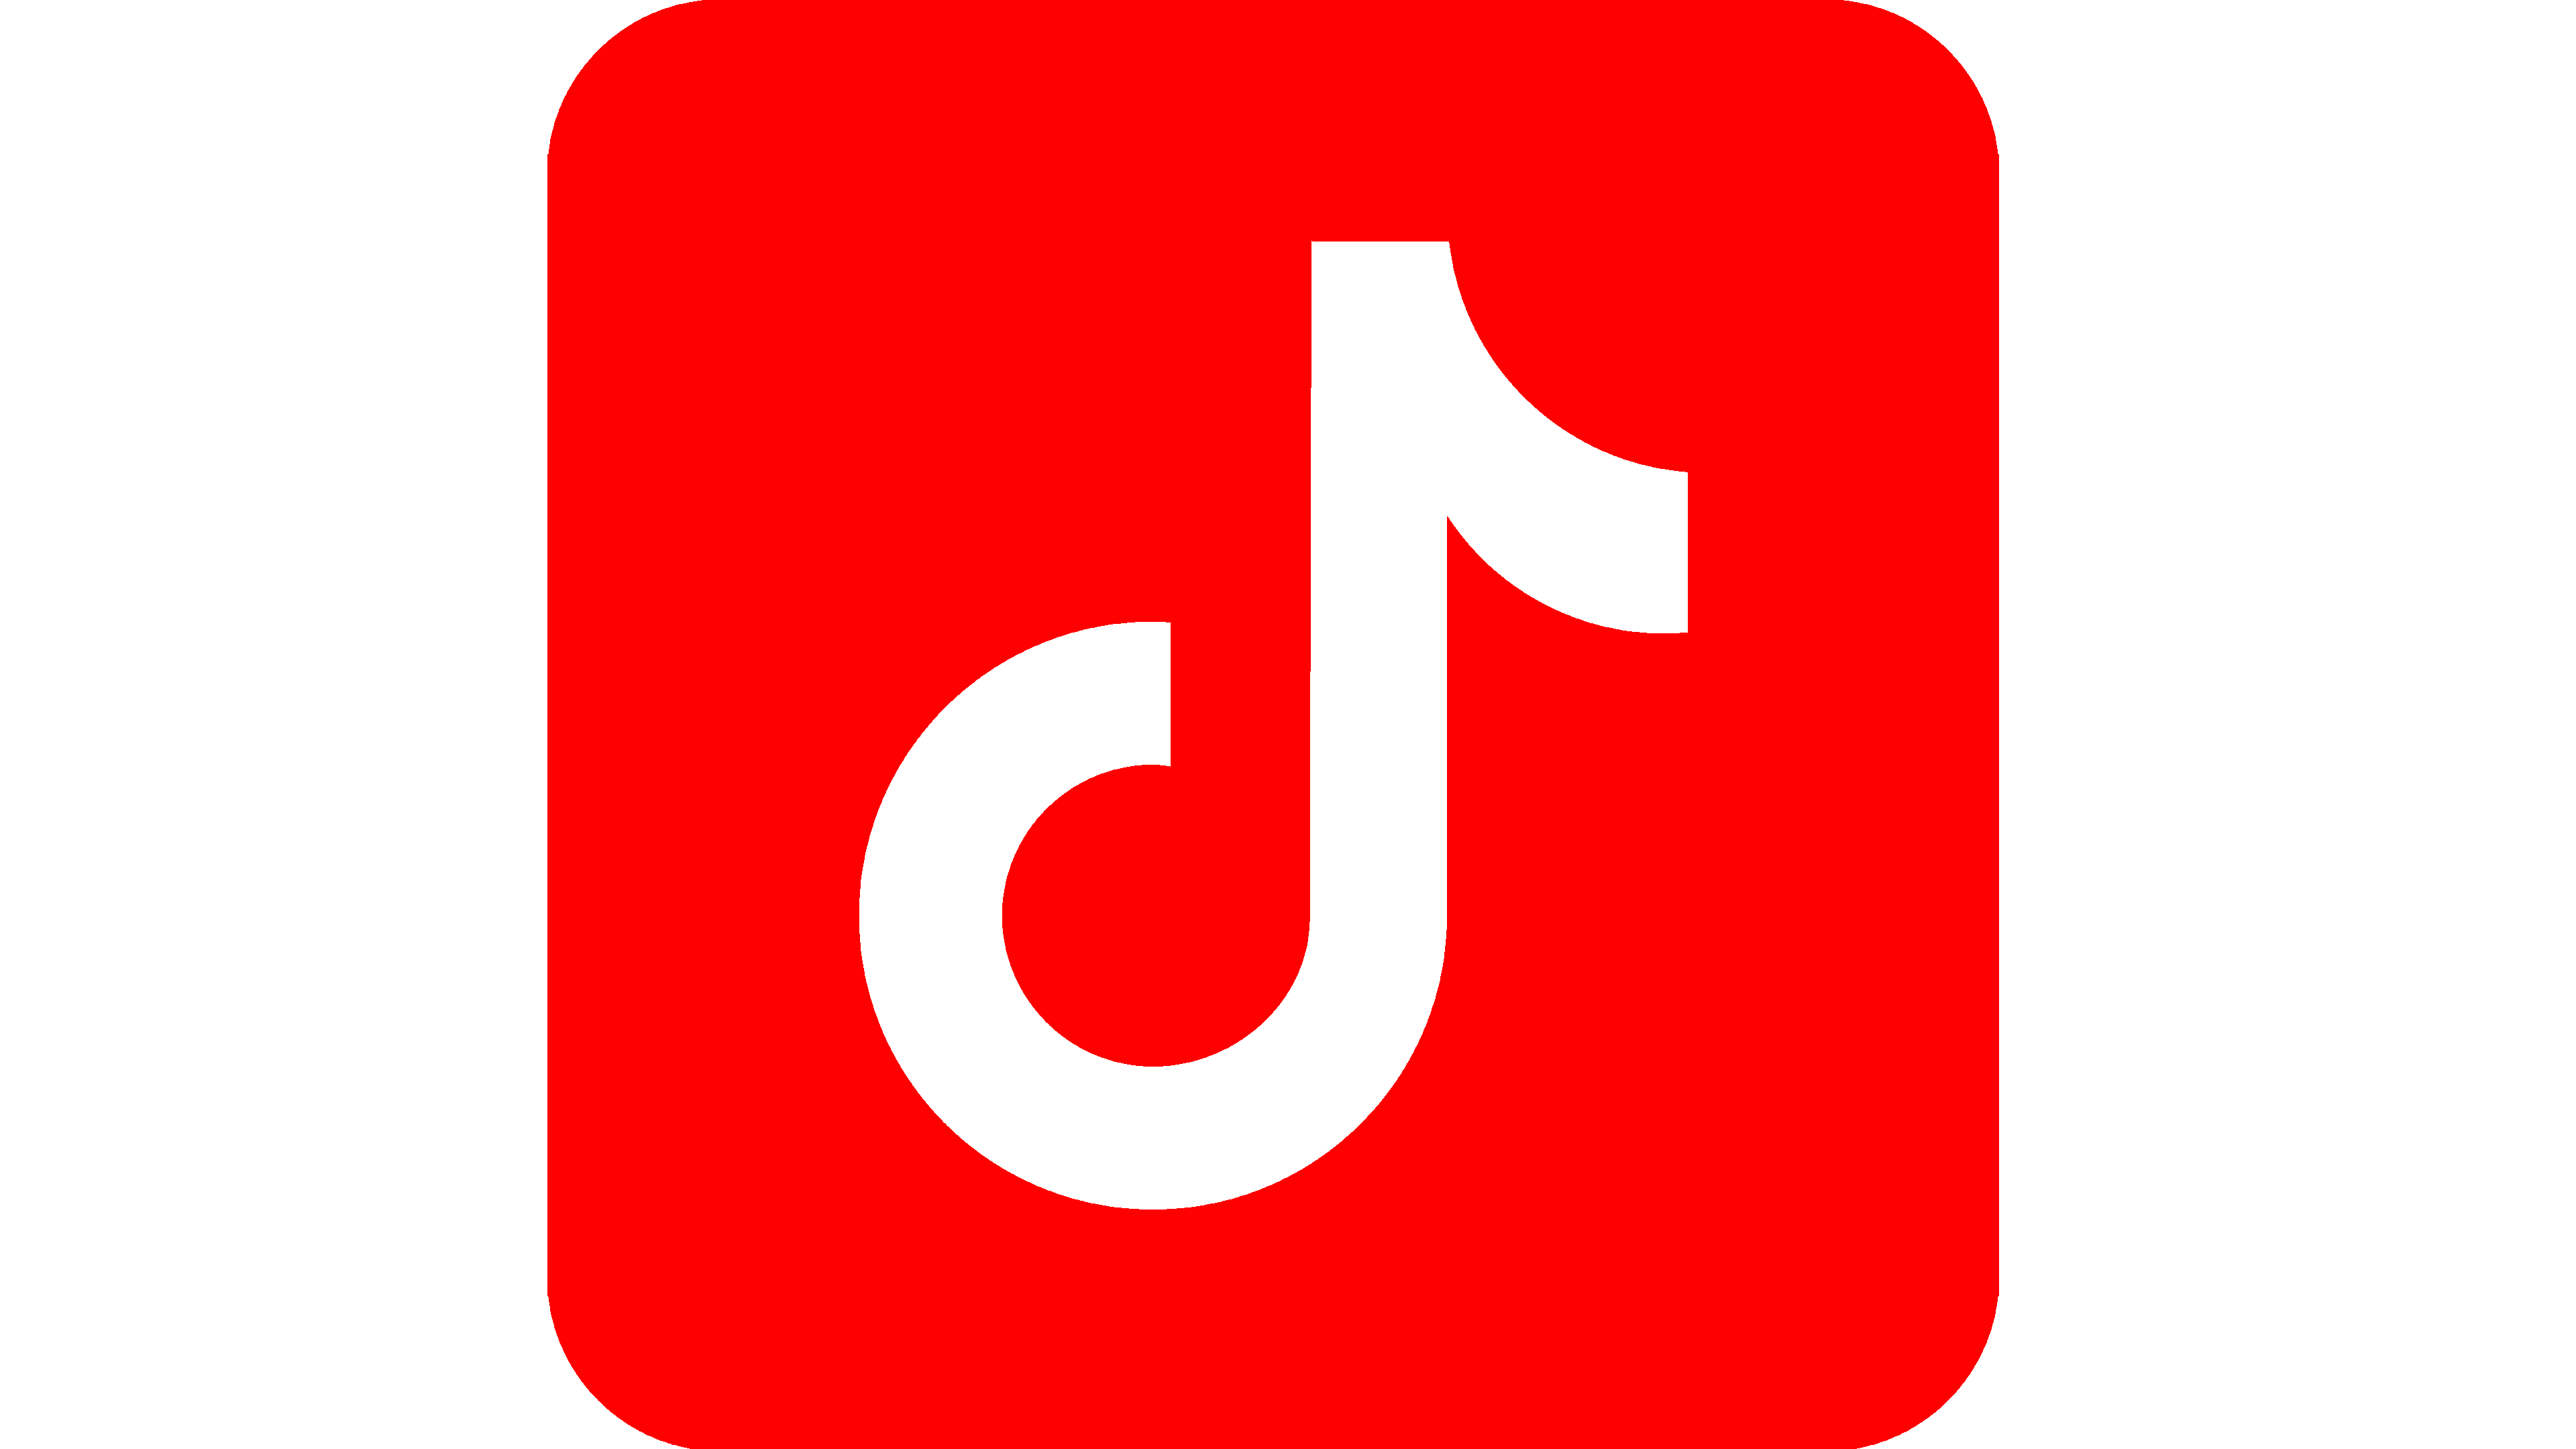 Tiktok Logo And Symbol Meaning History Png Brand